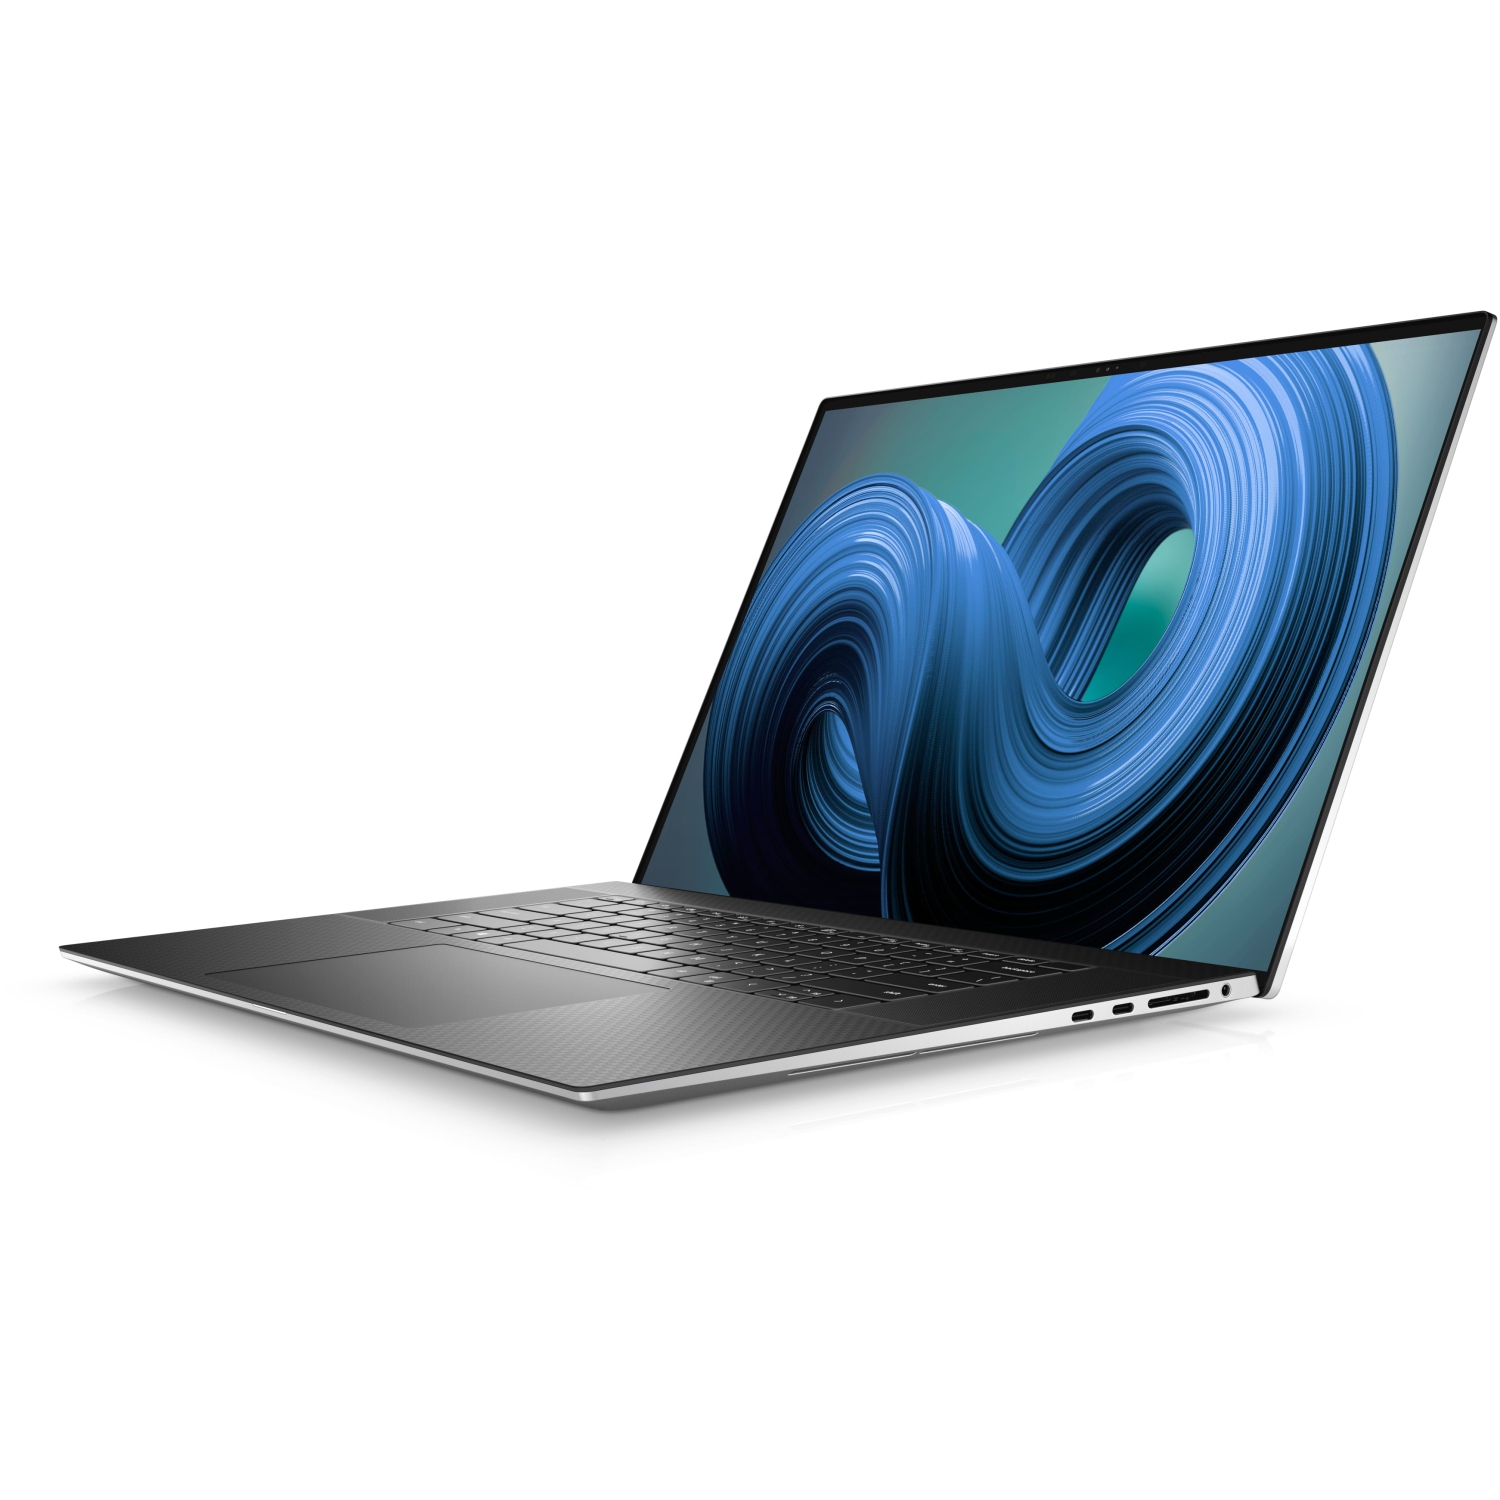 Refurbished (Excellent) – Dell XPS 9720 Laptop (2022) | 17" 4K Touch | Core i7 - 1TB SSD - 16GB RAM - RTX 3050 | 14 Cores @ 4.7 GHz - 12th Gen CPU